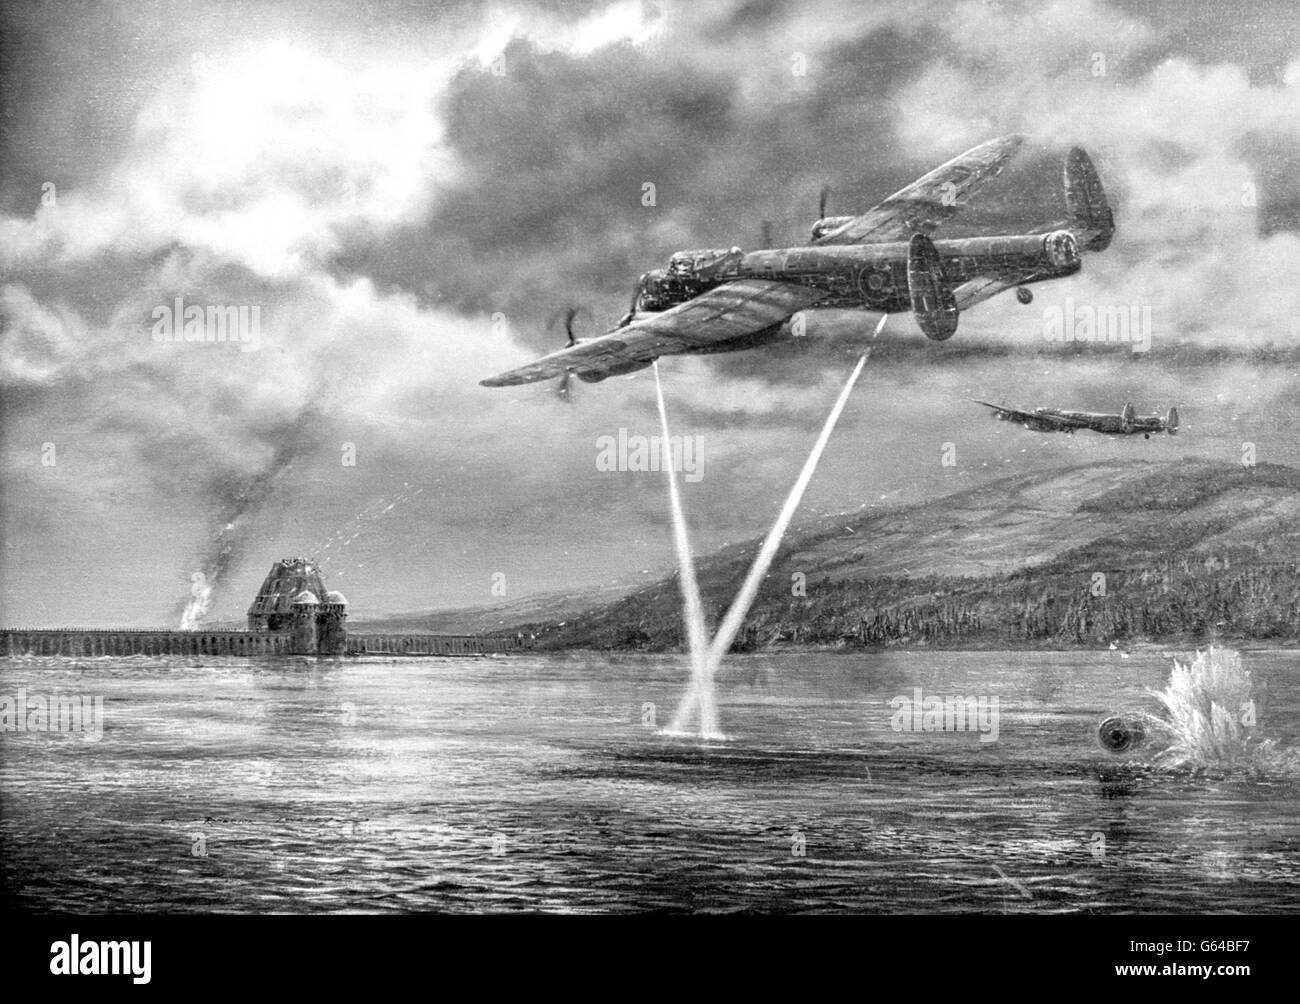 An artist's impression of Lancaster bombers from the RAF's No 617 Squadron attacking the Moehne dam in Nazi Germany using one of Barnes Wallis's bouncing bombs during the historic 'Dambusters' raid on May 17, 1943. Today at RAF Marham in Norfolk the Queen mother presented a new Standard to the squadron. Stock Photo